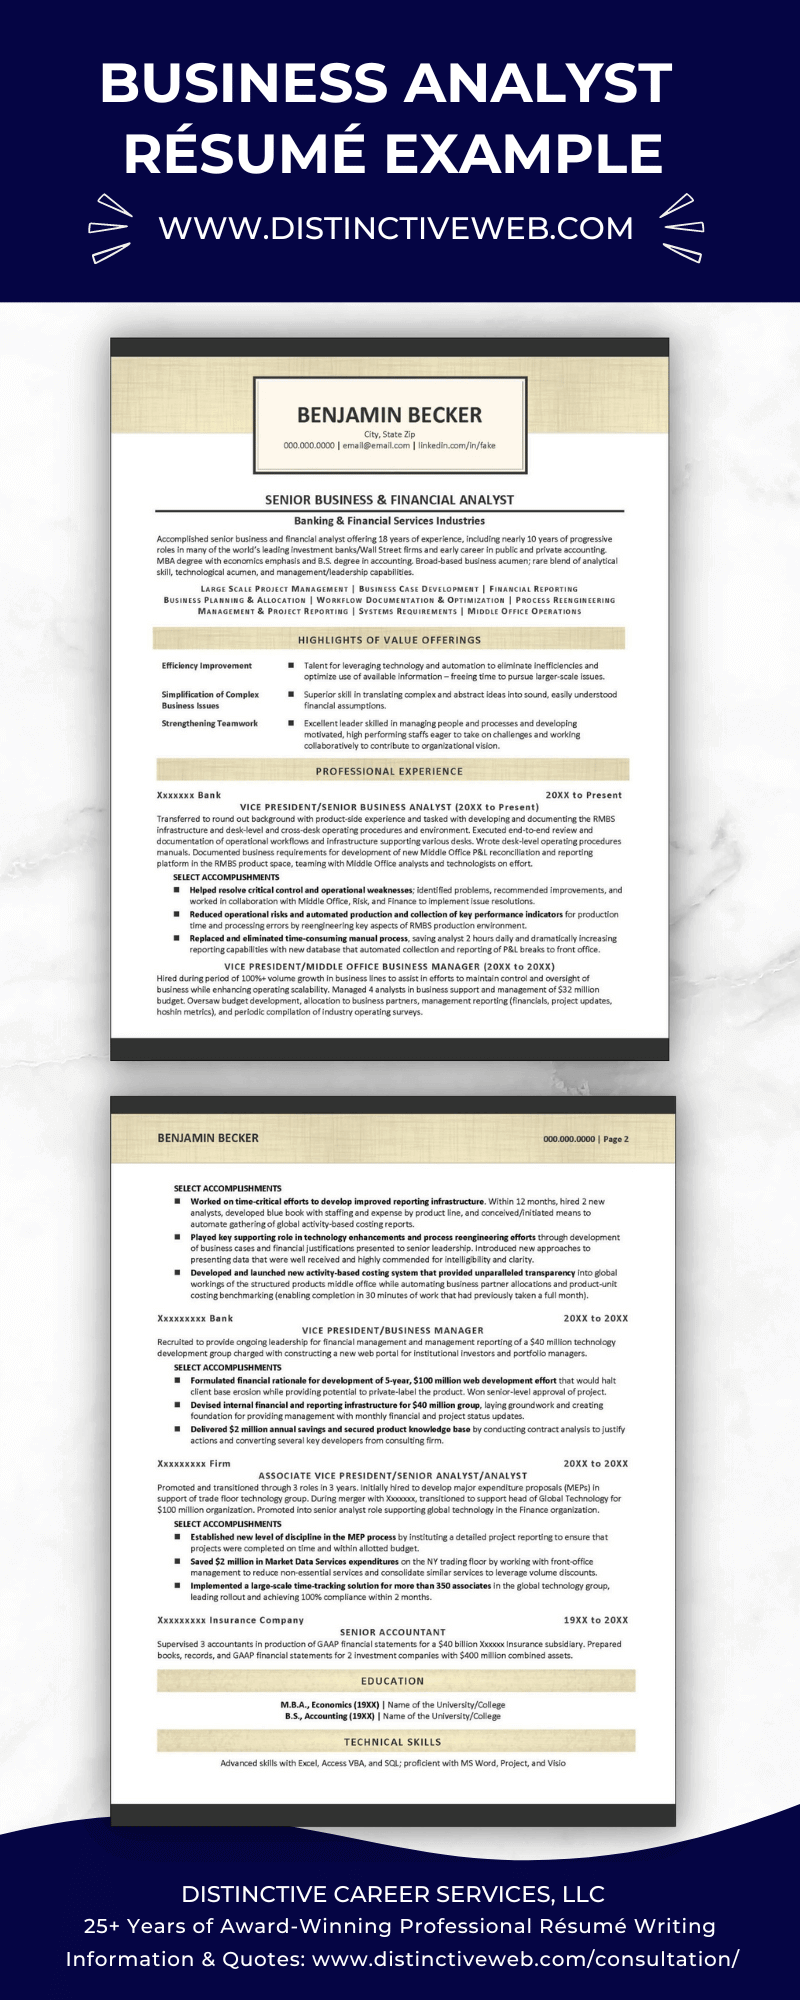 Business Analyst Resume Examples